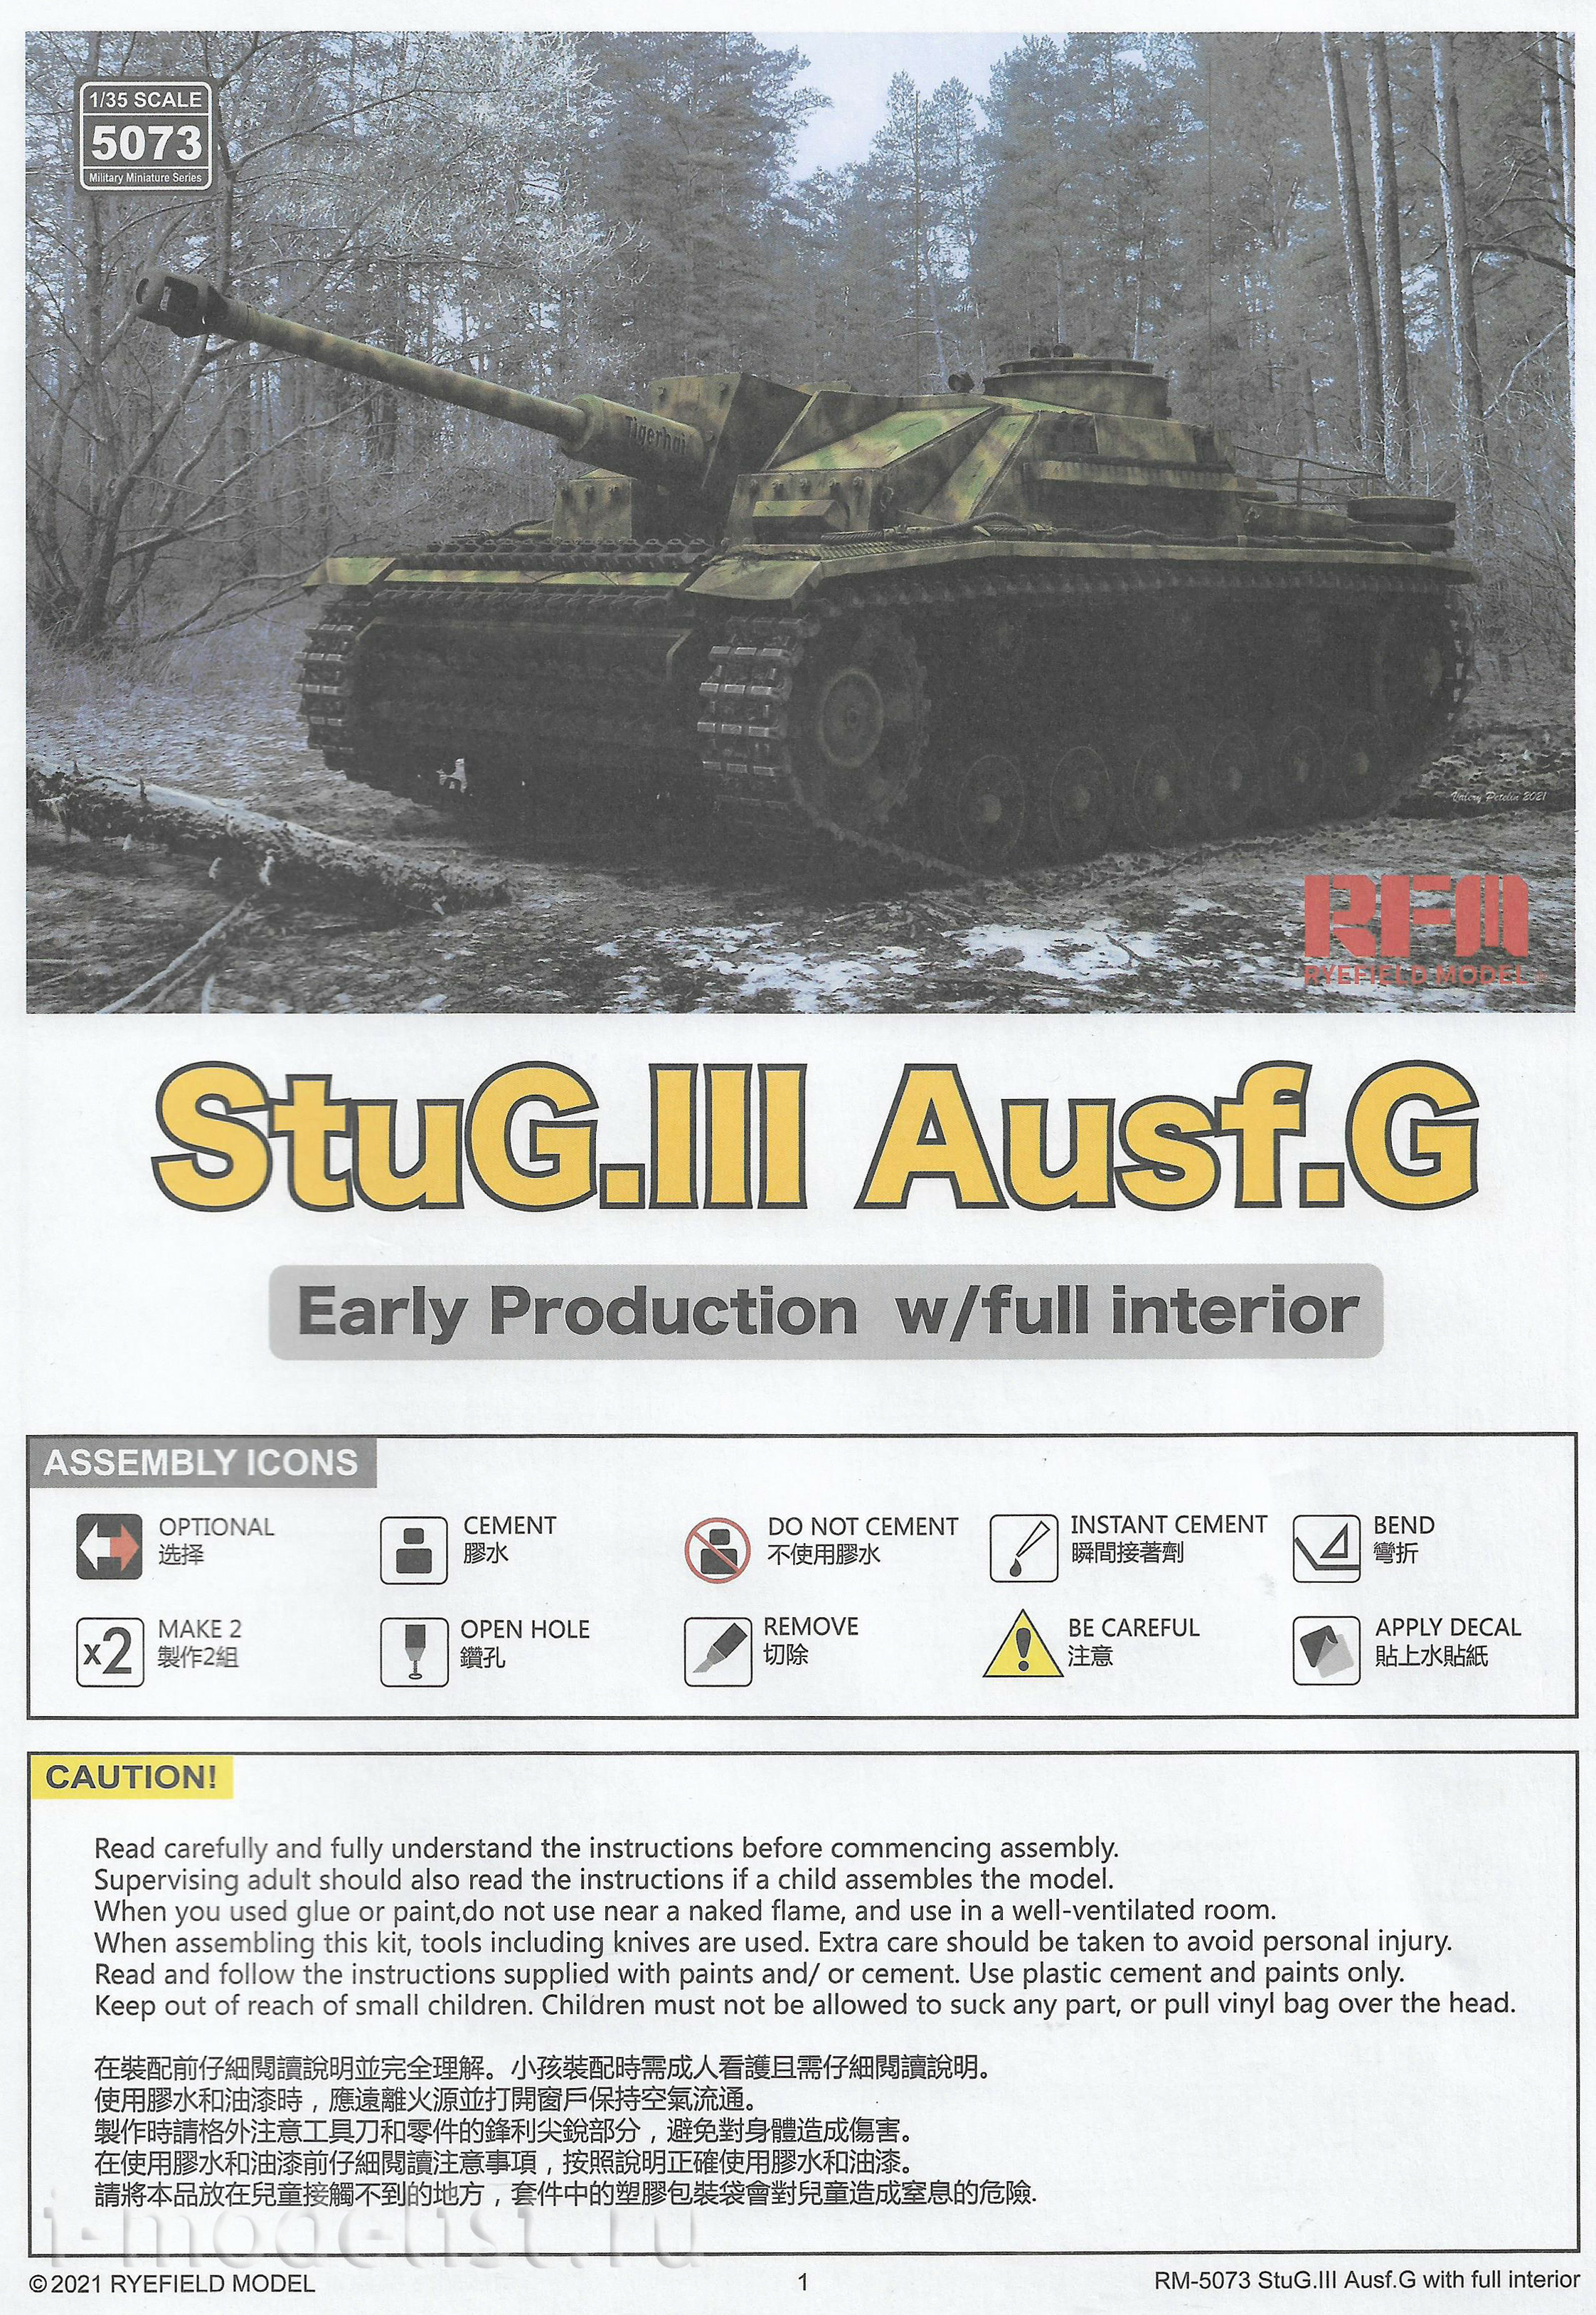 RM-5073 Rye Field Model 1/35 StuG III Ausf. G Early type with full interior and working tracks